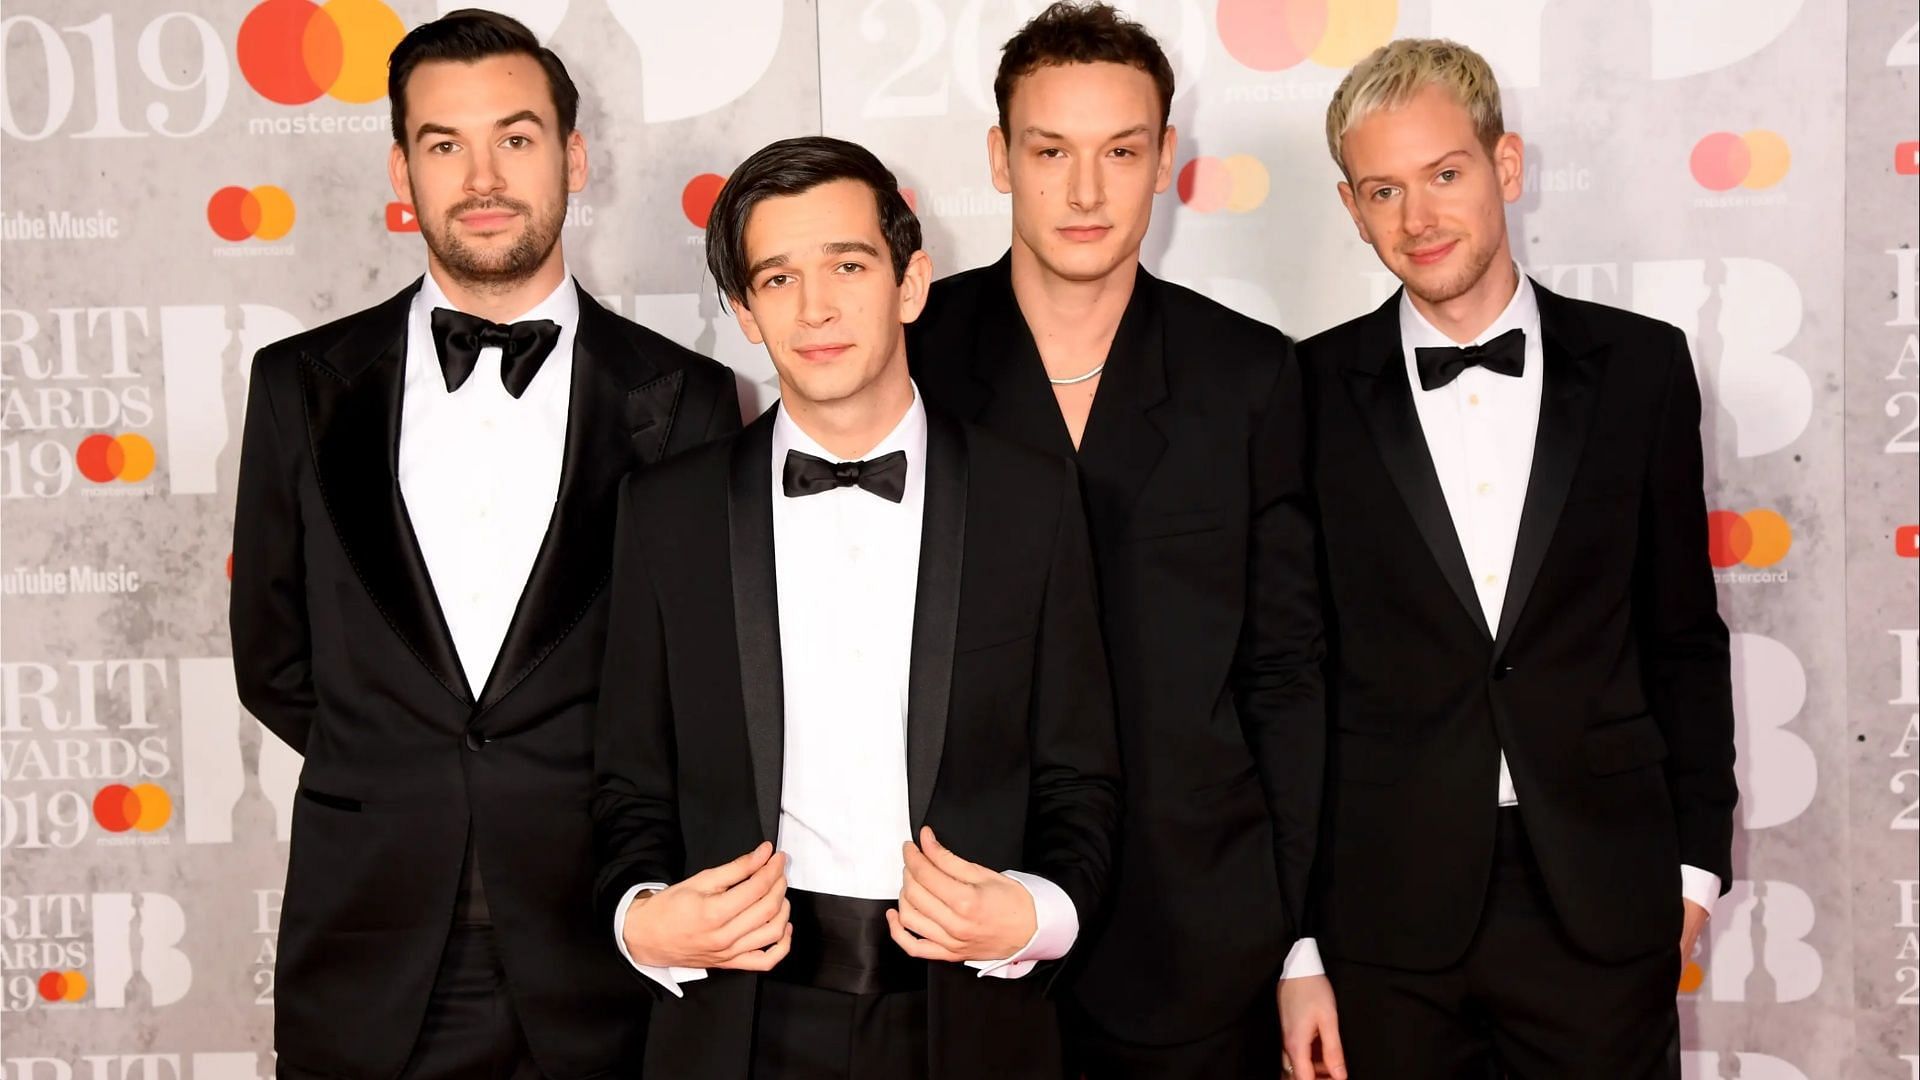 The 1975 garners backlash online following their ban from Kuala Lumpur. (Image via Getty Images)